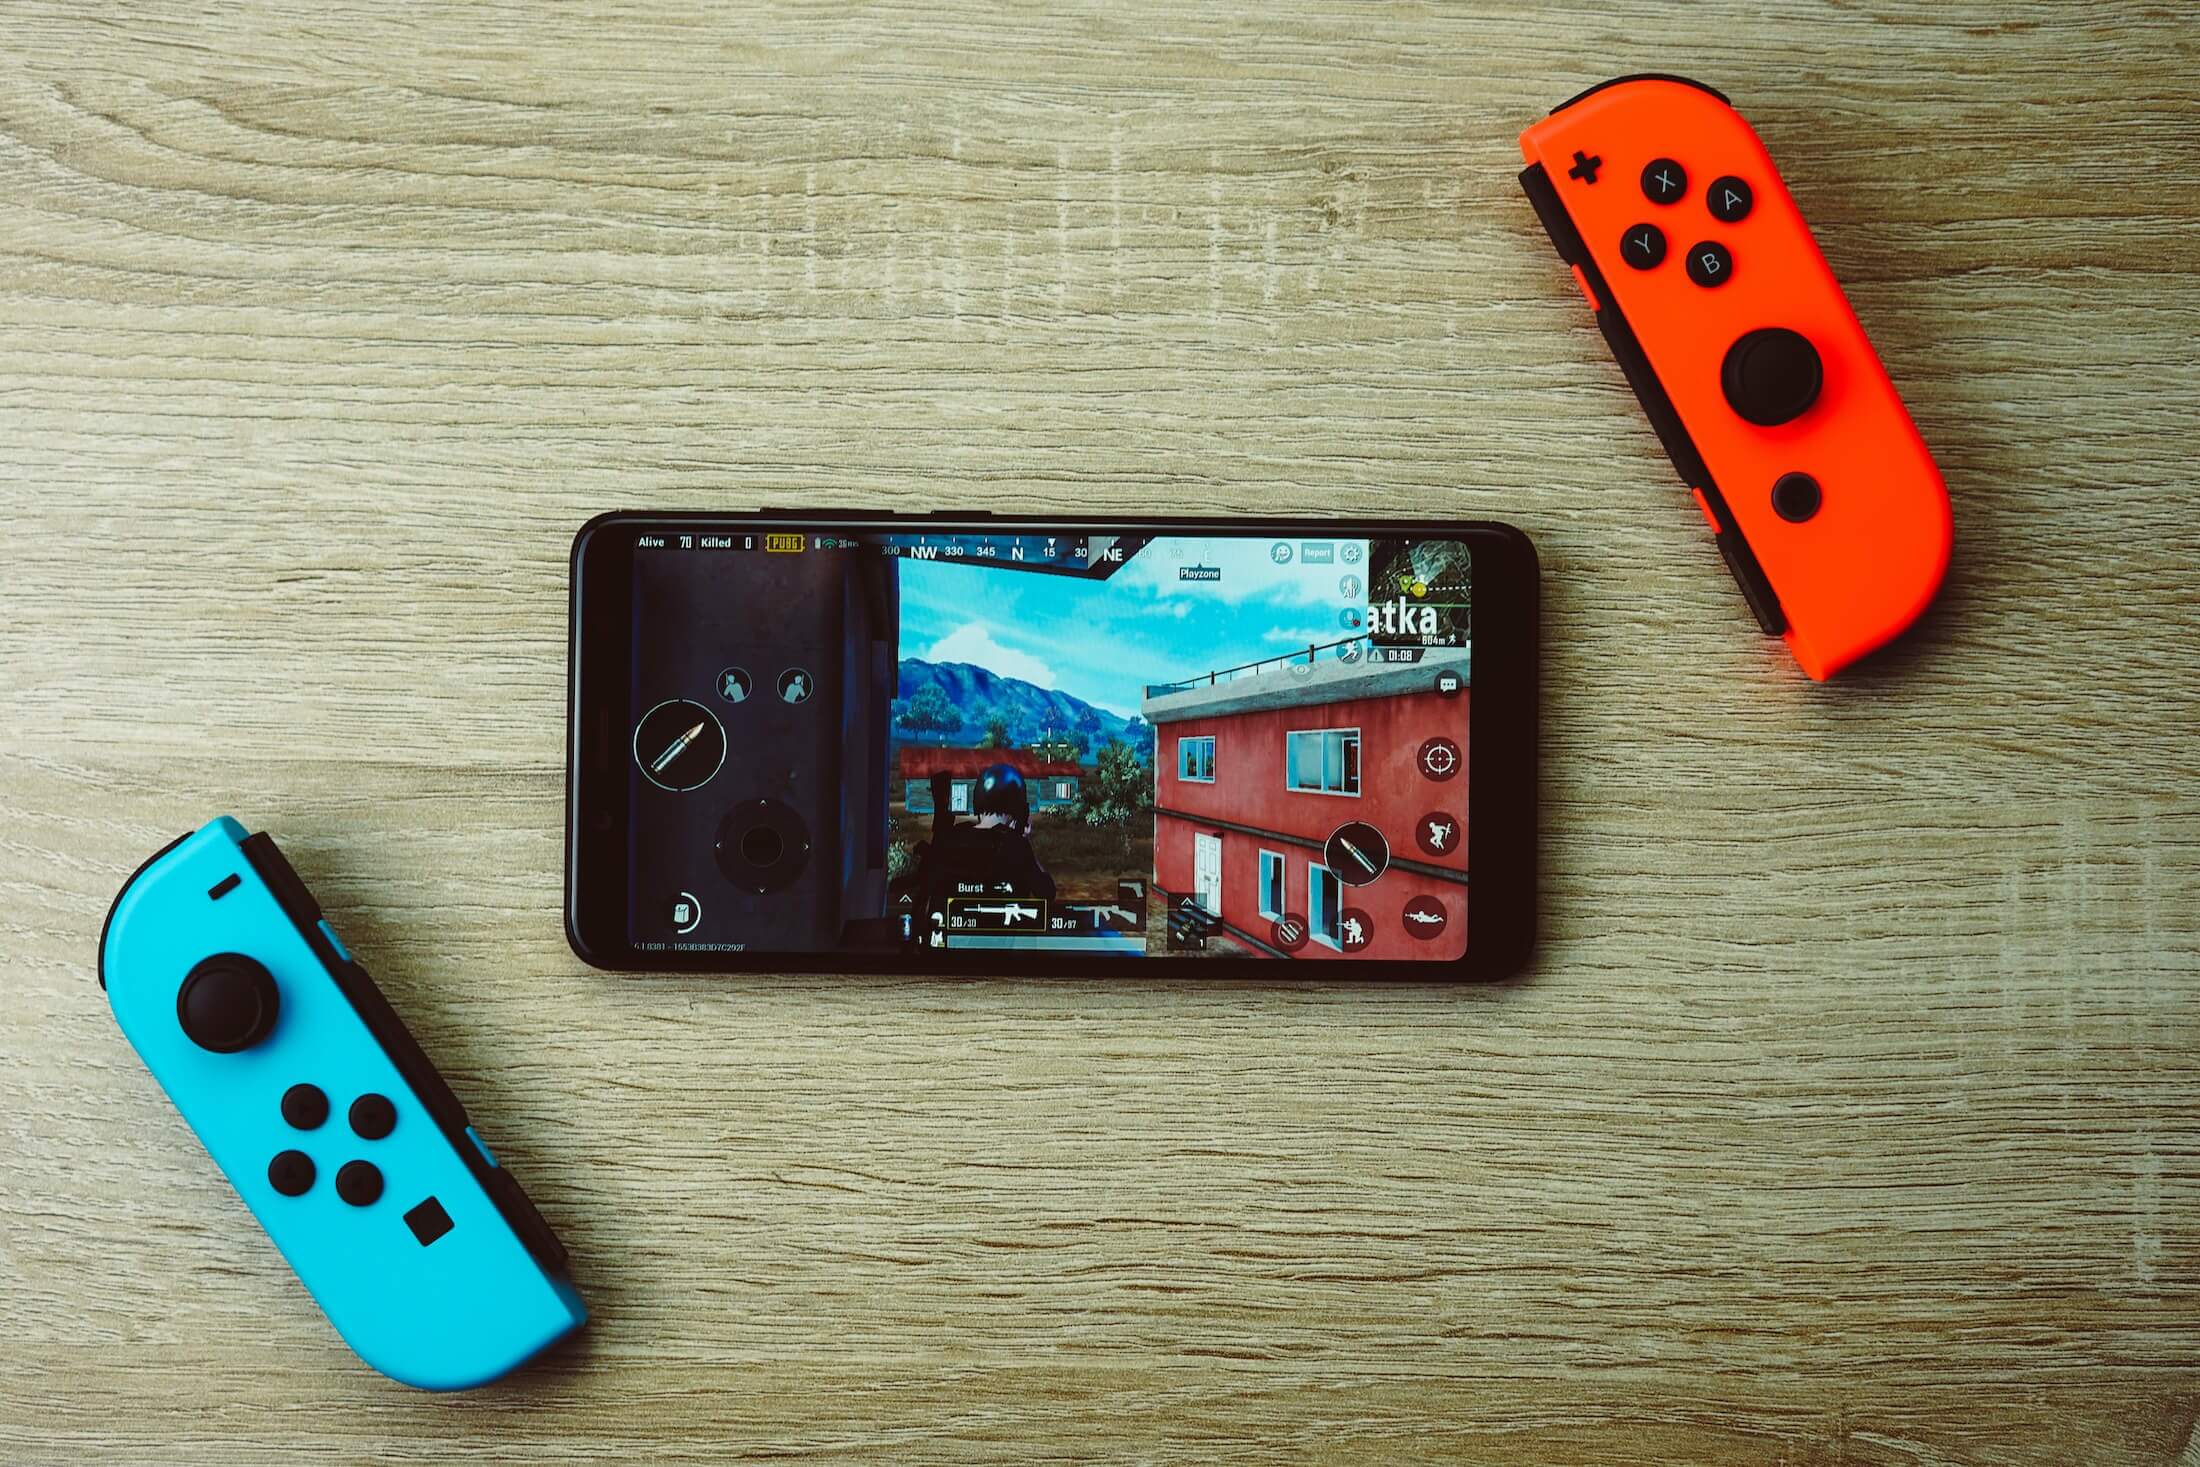 Joy-Con Droid turns your phone into a Nintendo Switch controller